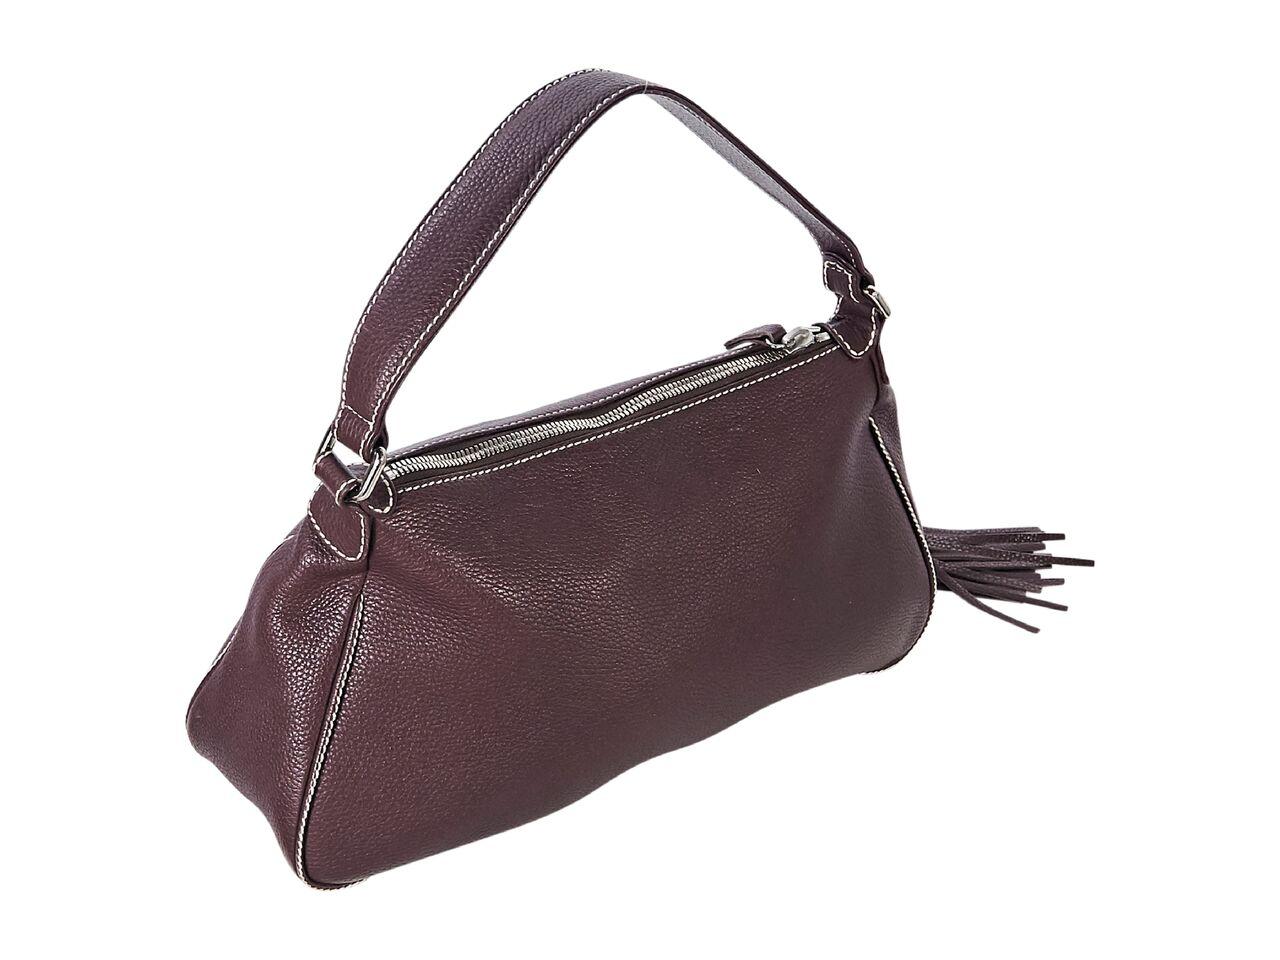 Product details:  Vintage burgundy pebbled leather shoulder bag by Chanel.  Features white topstitching.  Single shoulder strap.  Lined interior with inner zip pocket.  Exterior zip front pocket with tassel pull.  Silvertone hardware.  15